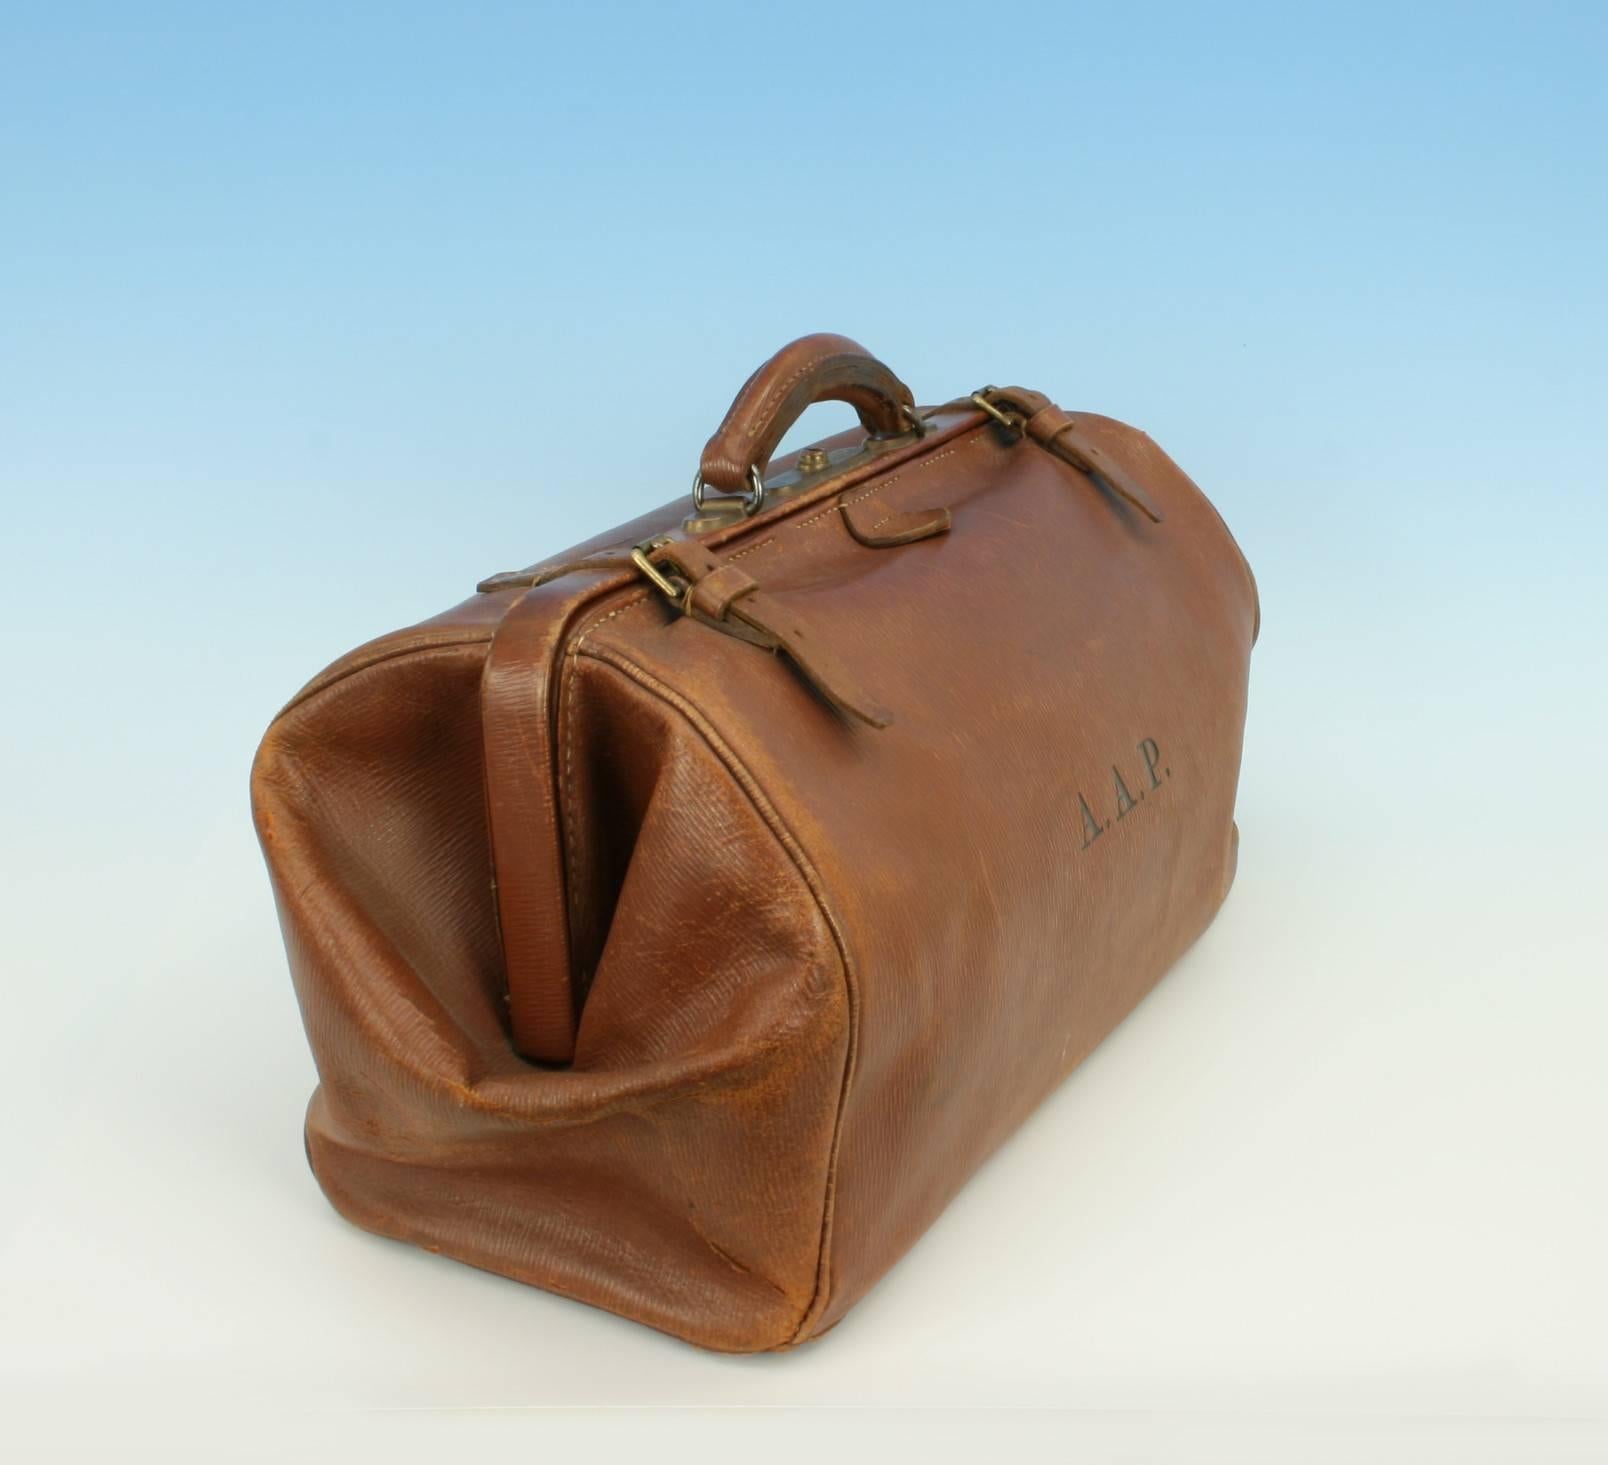 Vintage leather luggage, Gladstone bag, kit bag.
A traditional square mouth brown leather 'Gladstone' bag. The bag is fitted with four brass studded feet (one missing), a central push button lock, two leather straps and a single carry handle. The